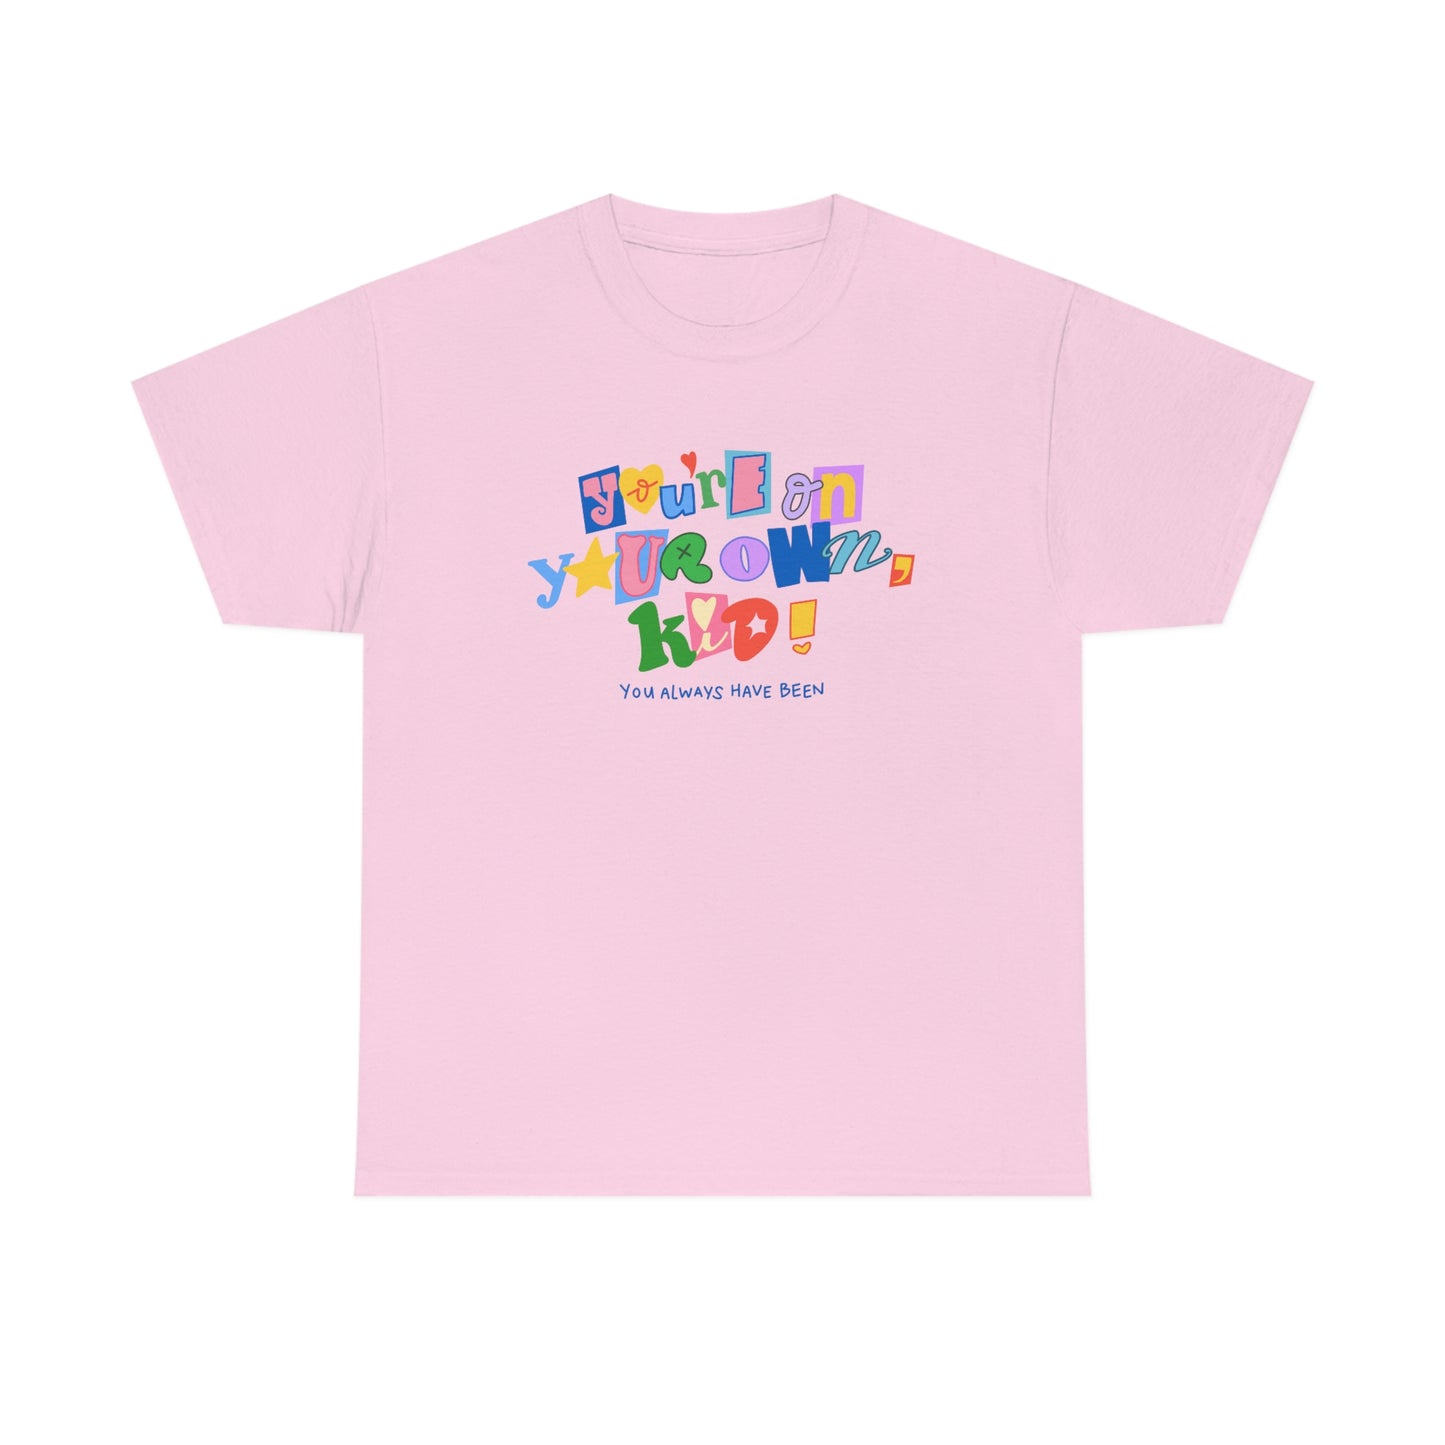 You're On Your Own Kid regular tee